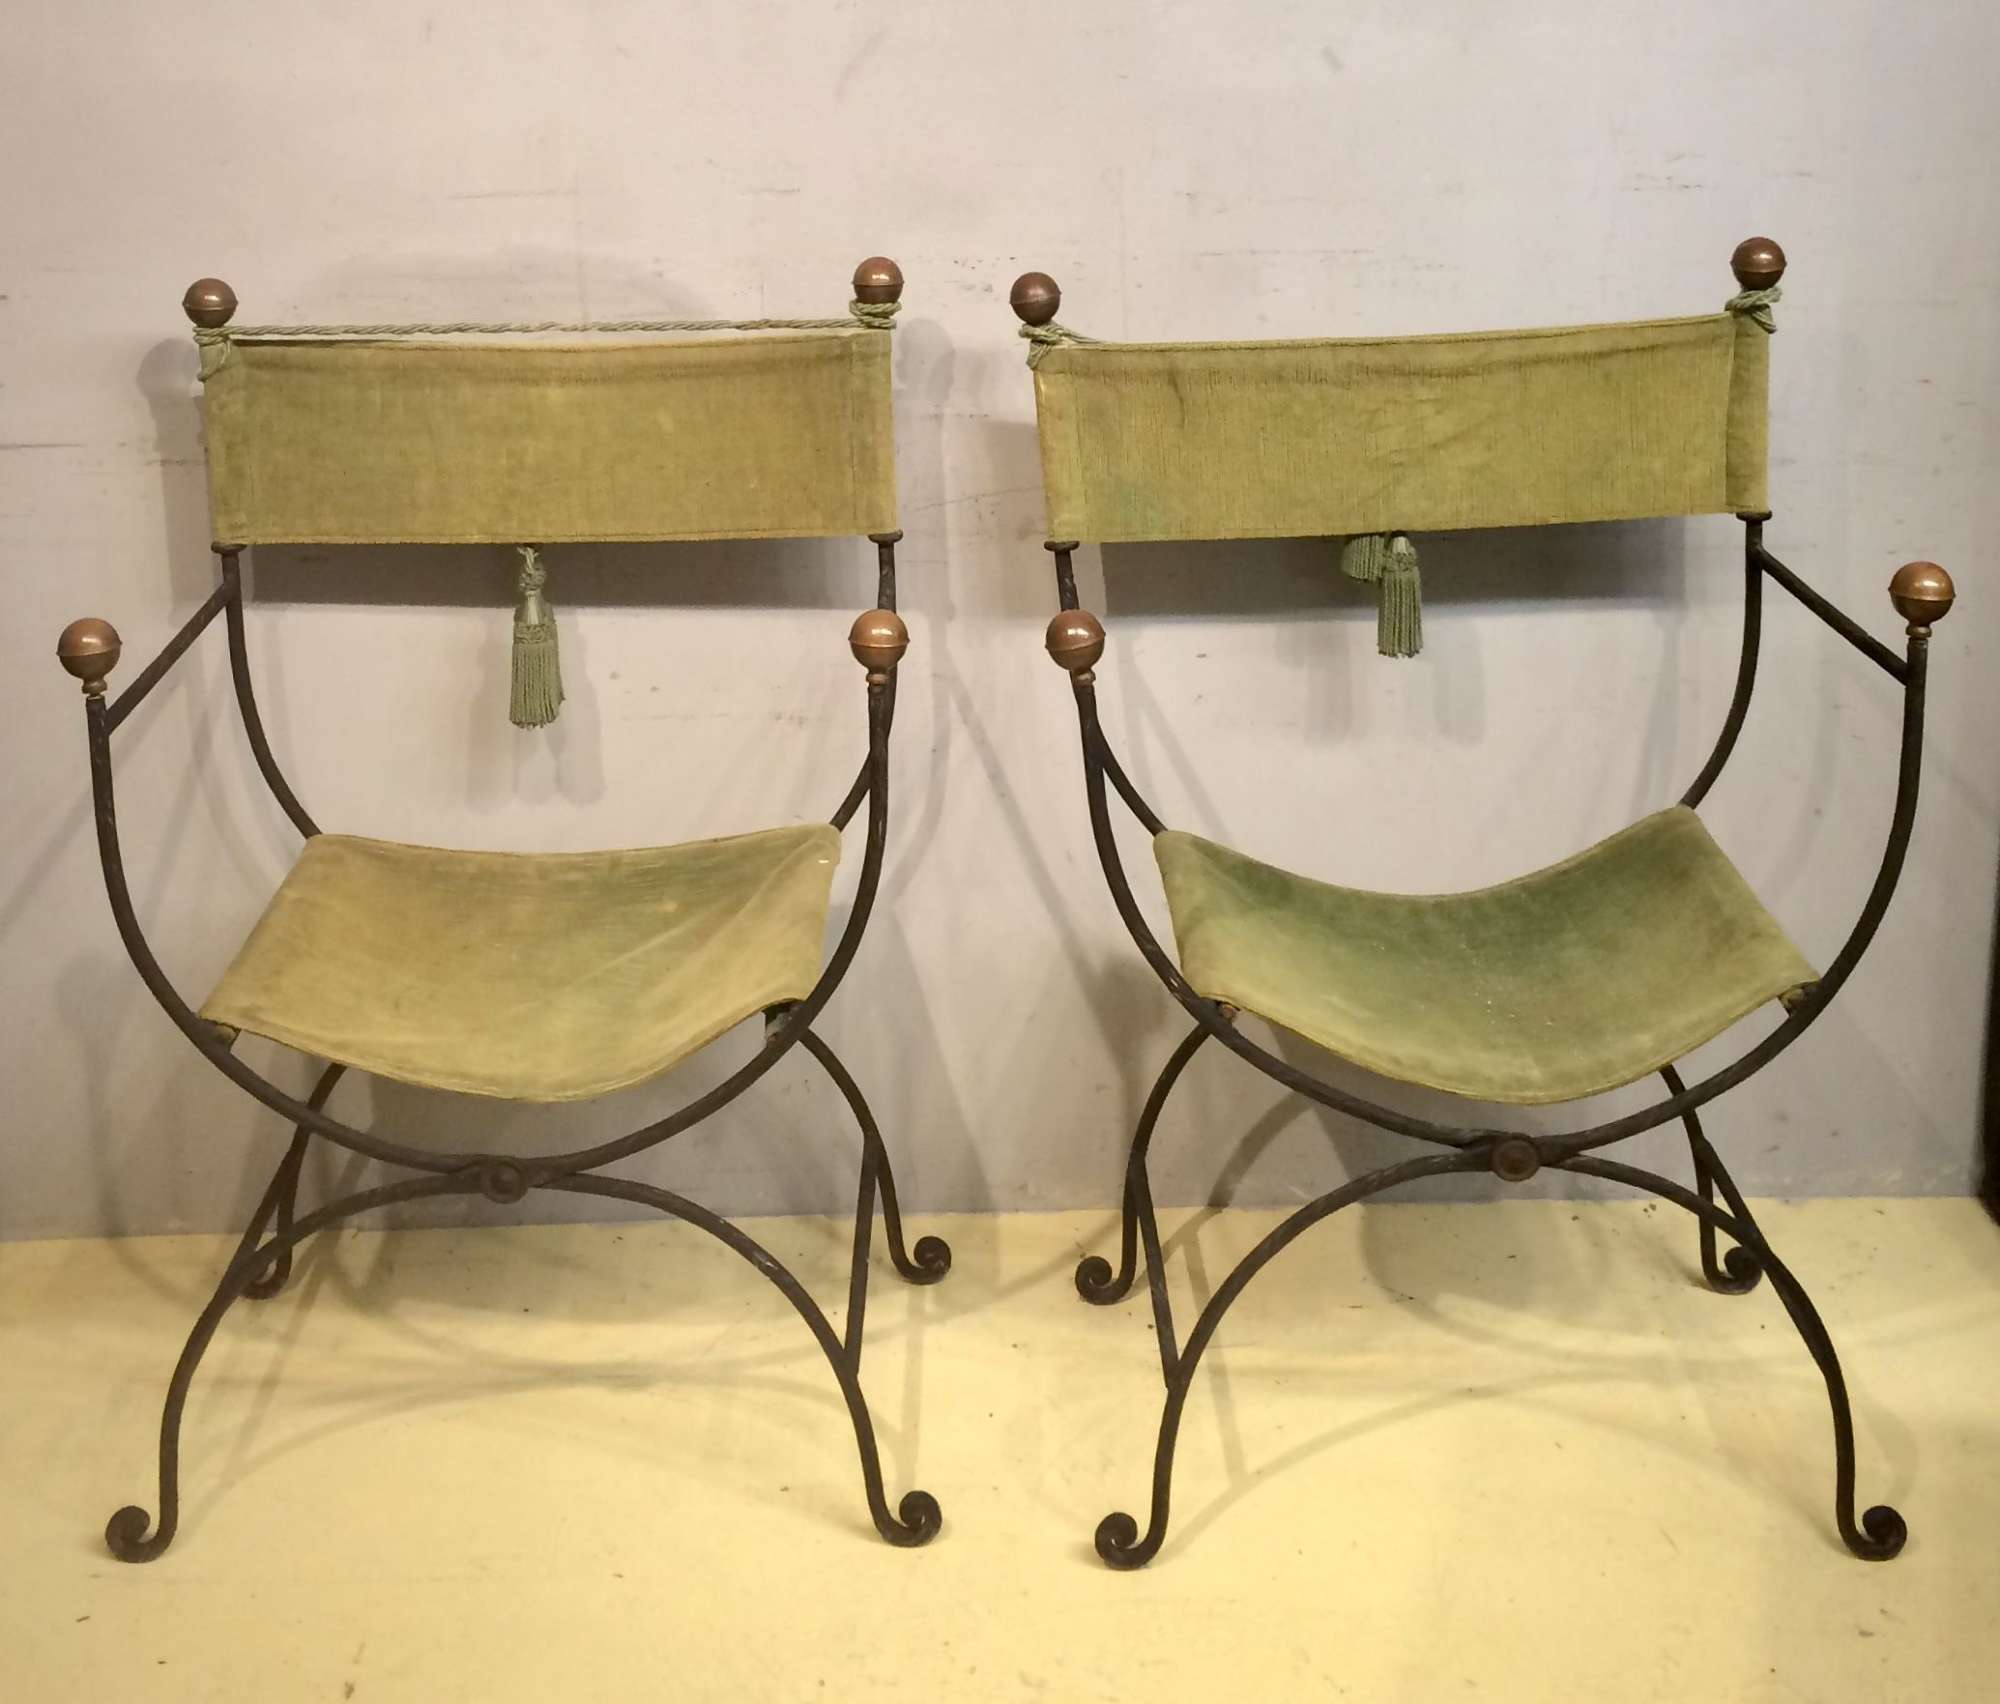 A pair of Spanish decorative iron folding chairs.